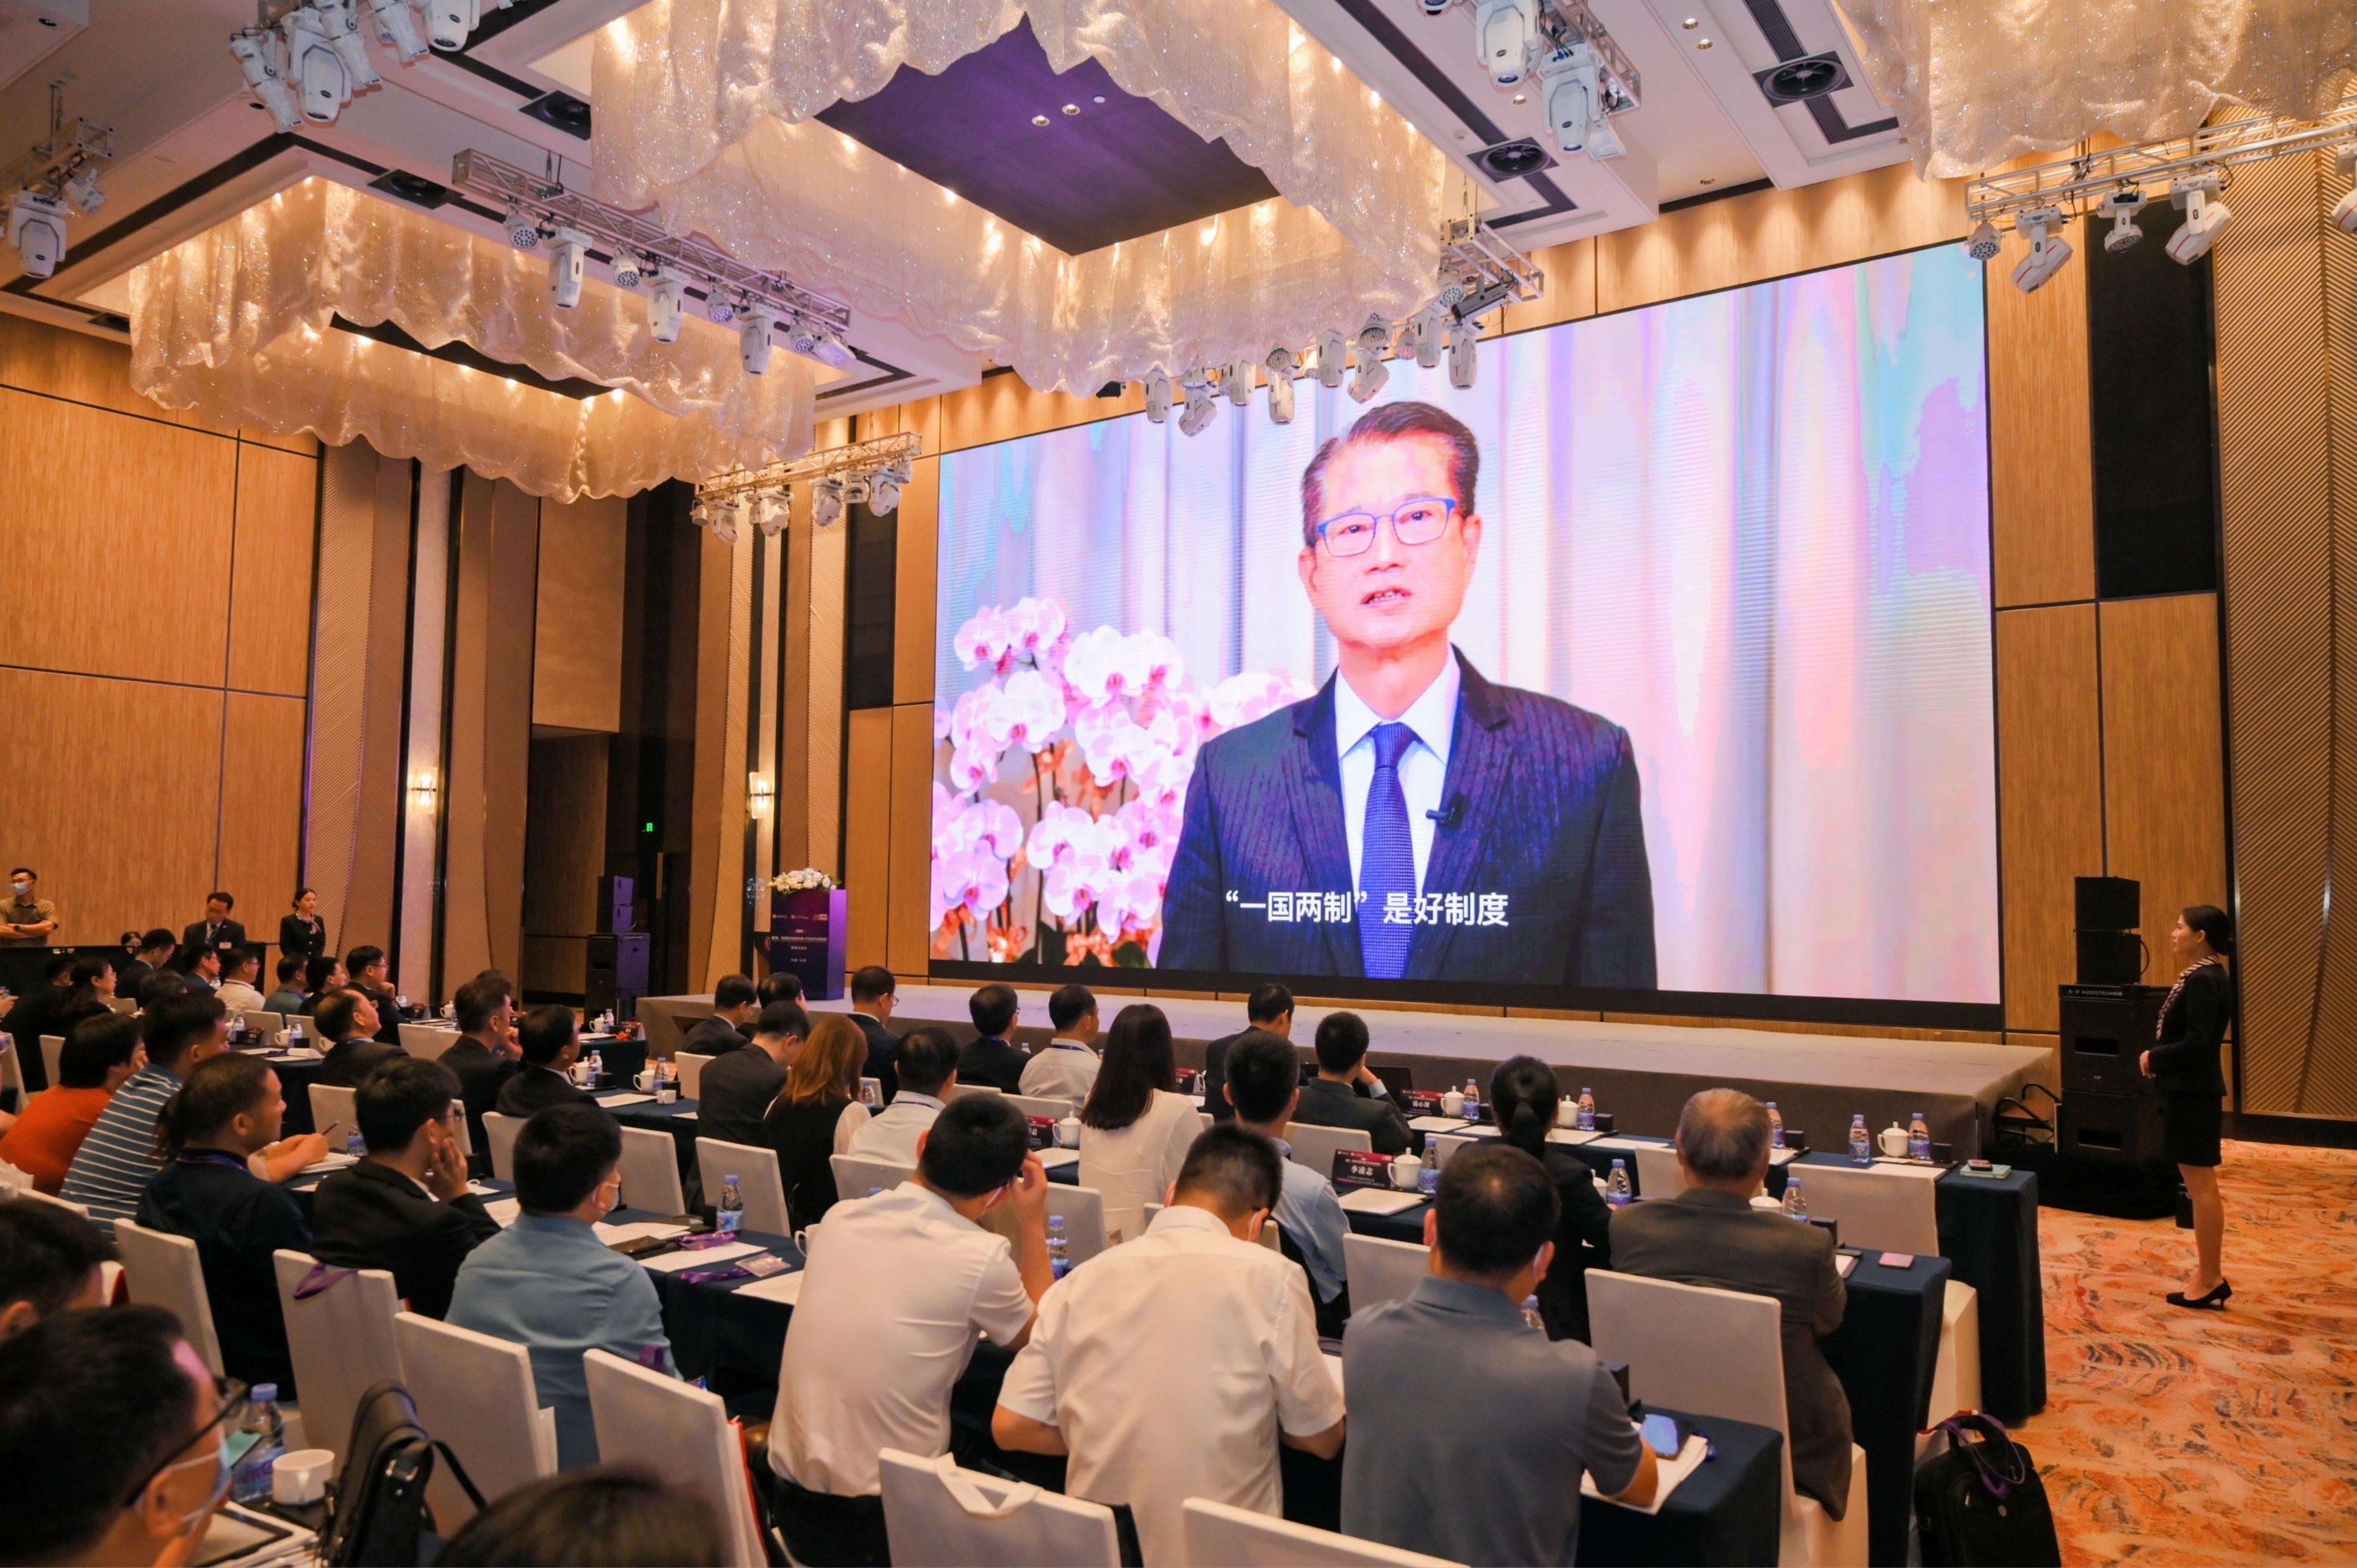 The Hong Kong Special Administrative Region Government and the People's Government of Anhui Province hosted a "Hong Kong - Unparalleled Opportunities to Expand Your Global Business" joint seminar in Hefei, Anhui Province, today (August 8). Photo shows the Financial Secretary, Mr Paul Chan, delivering his welcoming remarks via recorded video to the guests at the seminar. 

